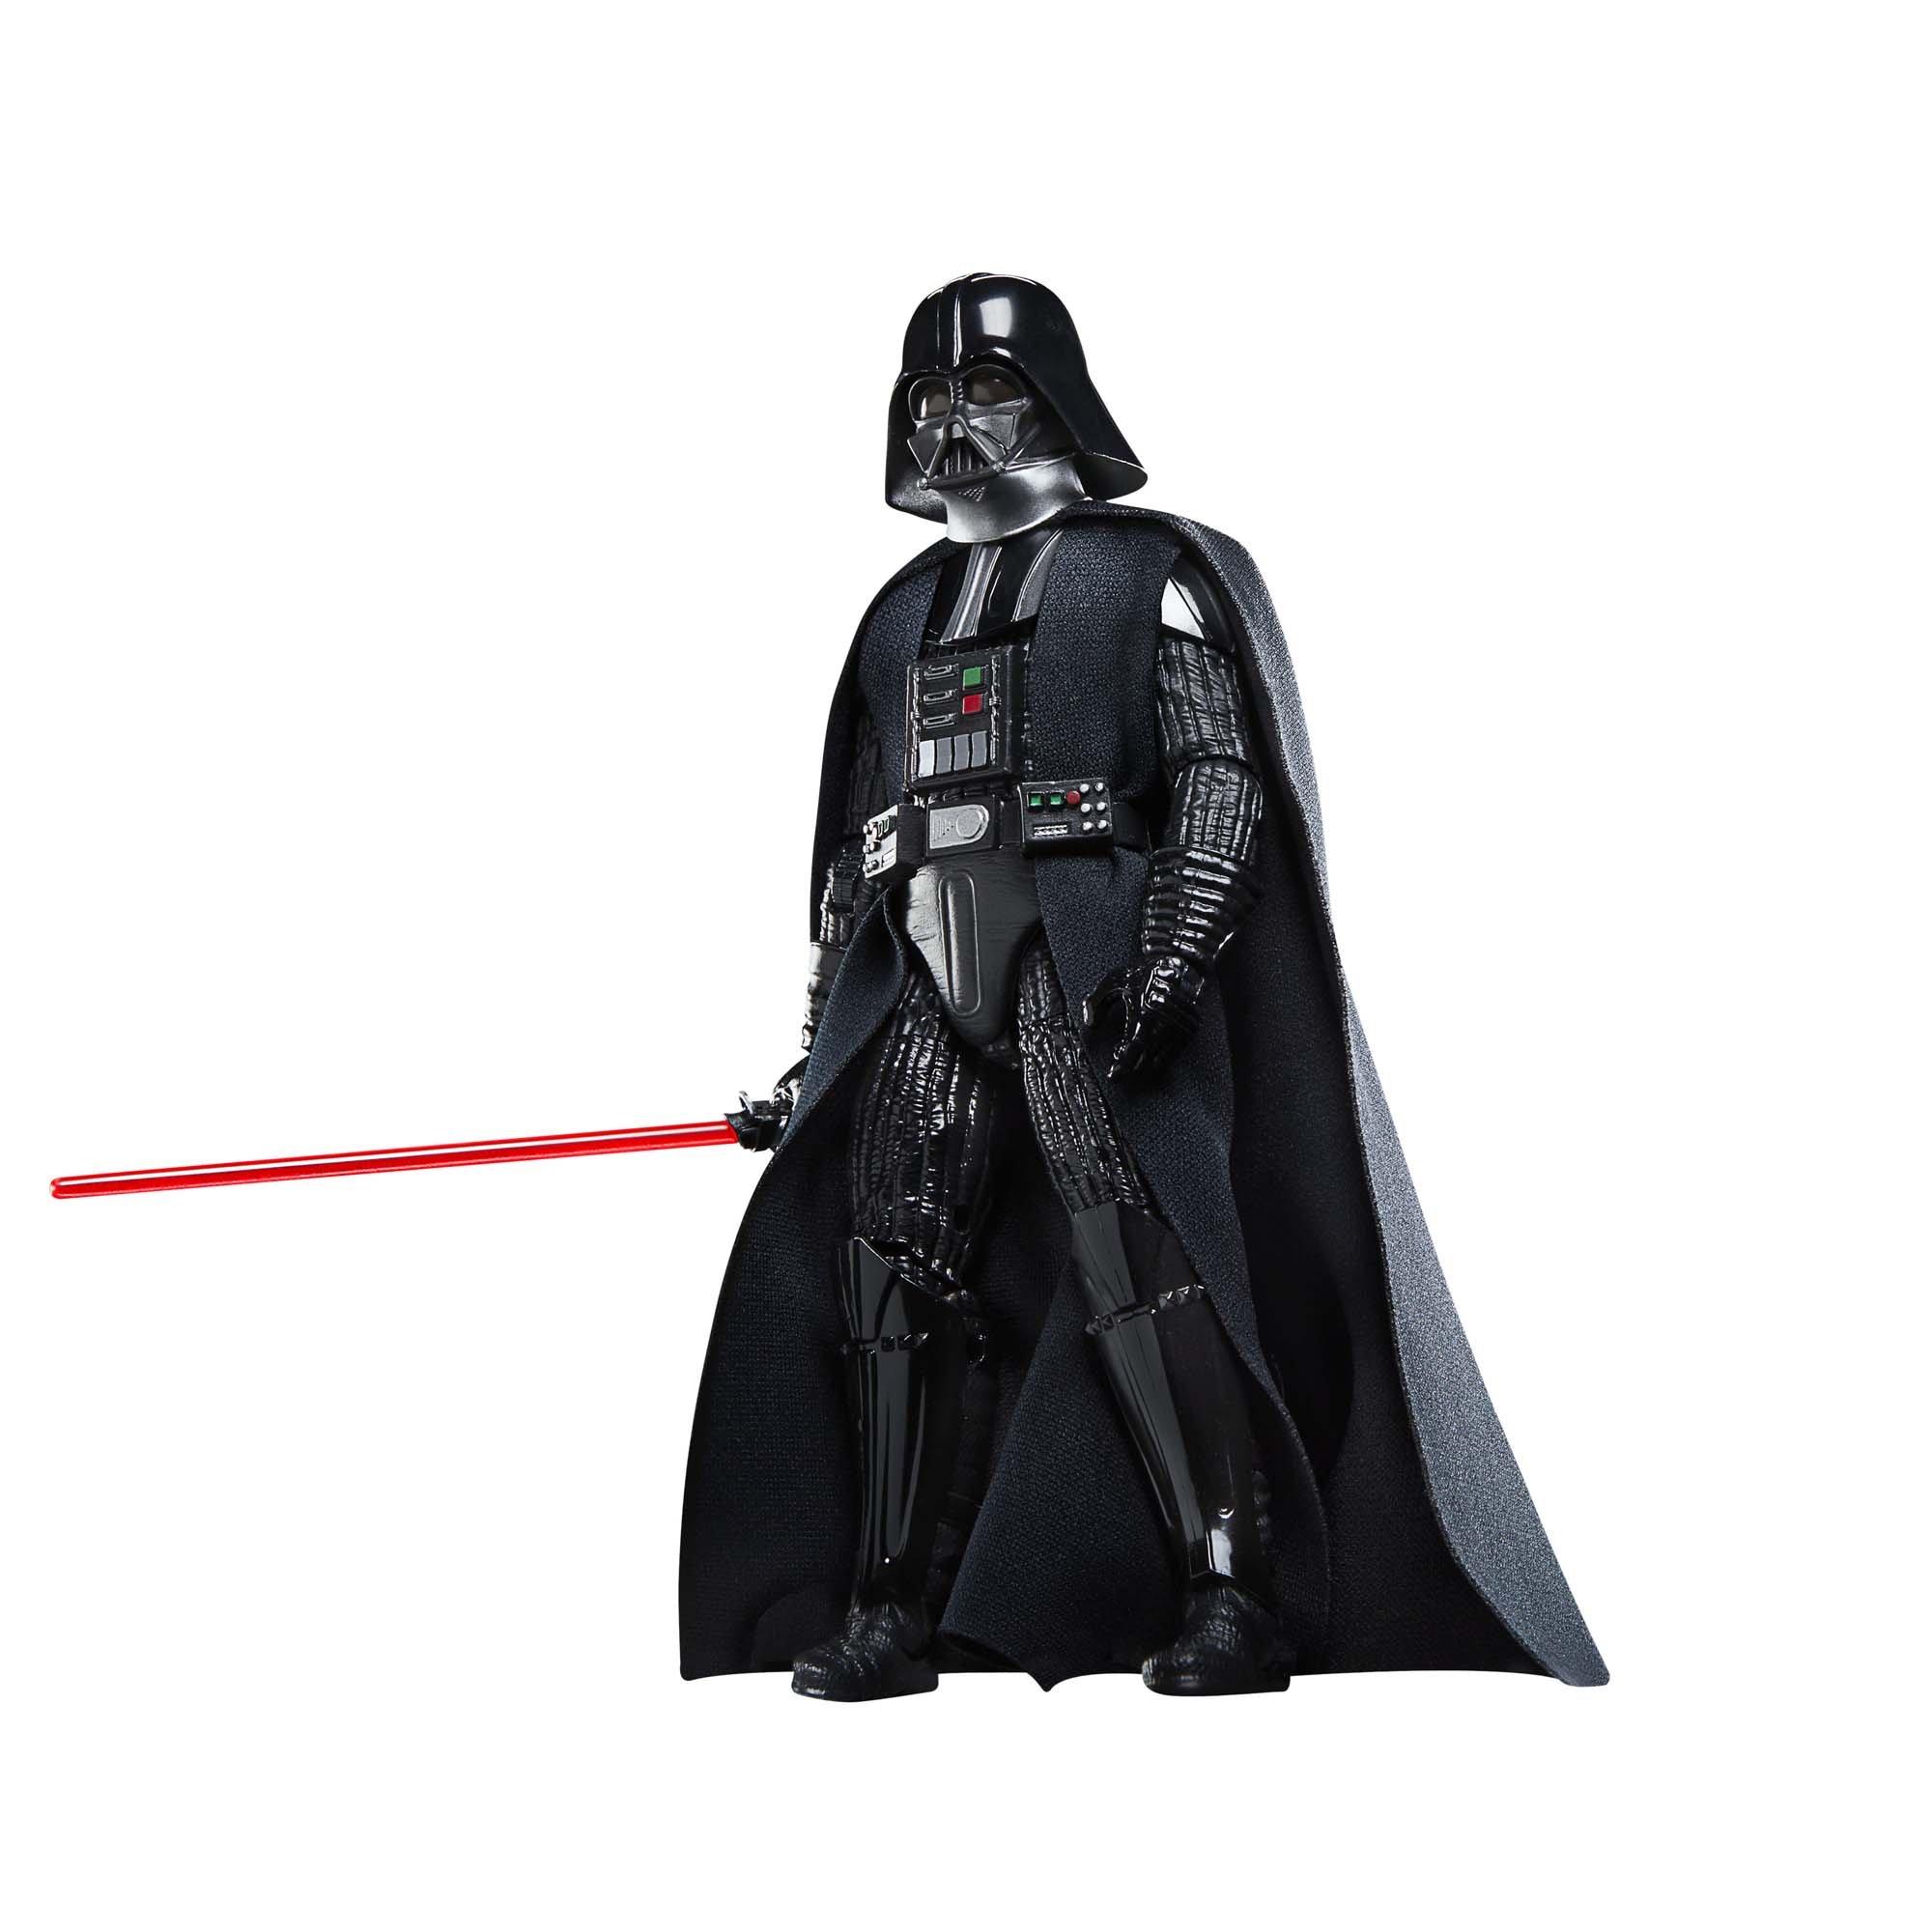 Hasbro Star Wars: The Black Series Star Wars: A New Hope Darth Vader 6-in Action Figure